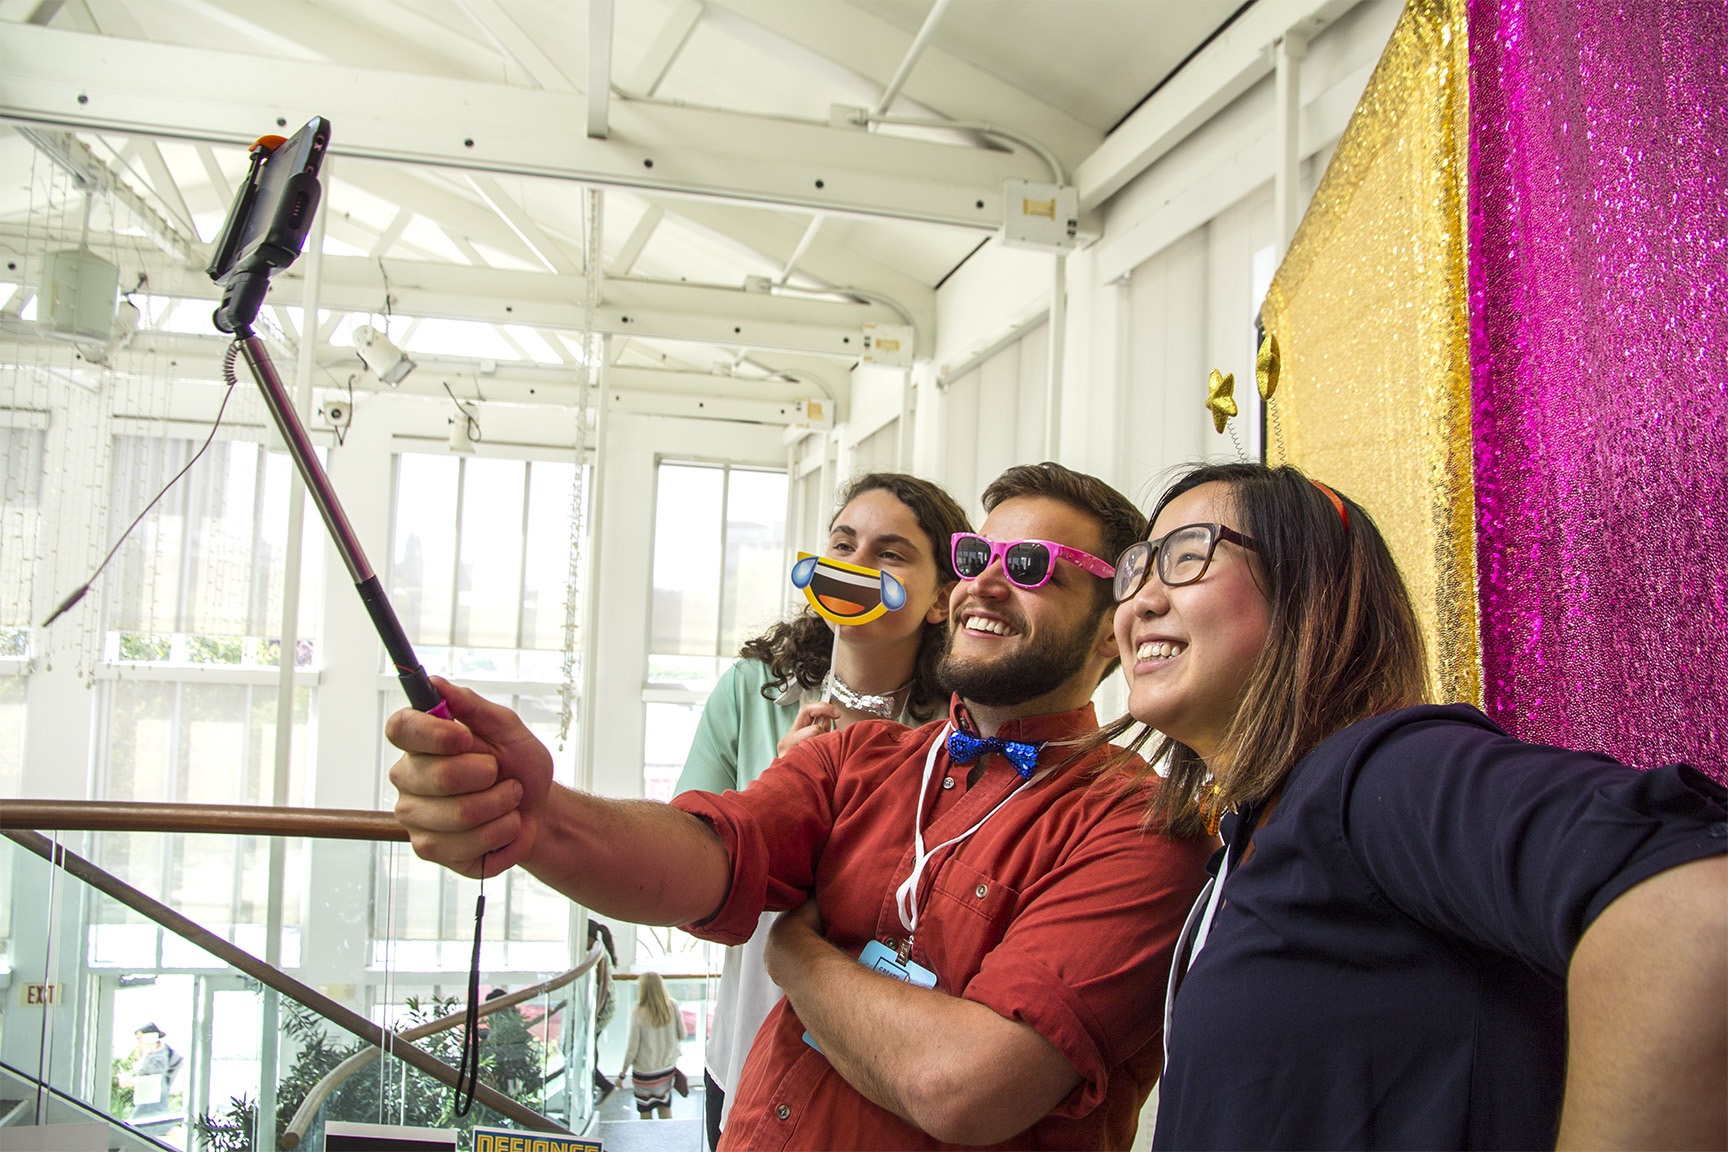 Picture of 3 people taking a selfie using fun props in front of a sparkly backdrop